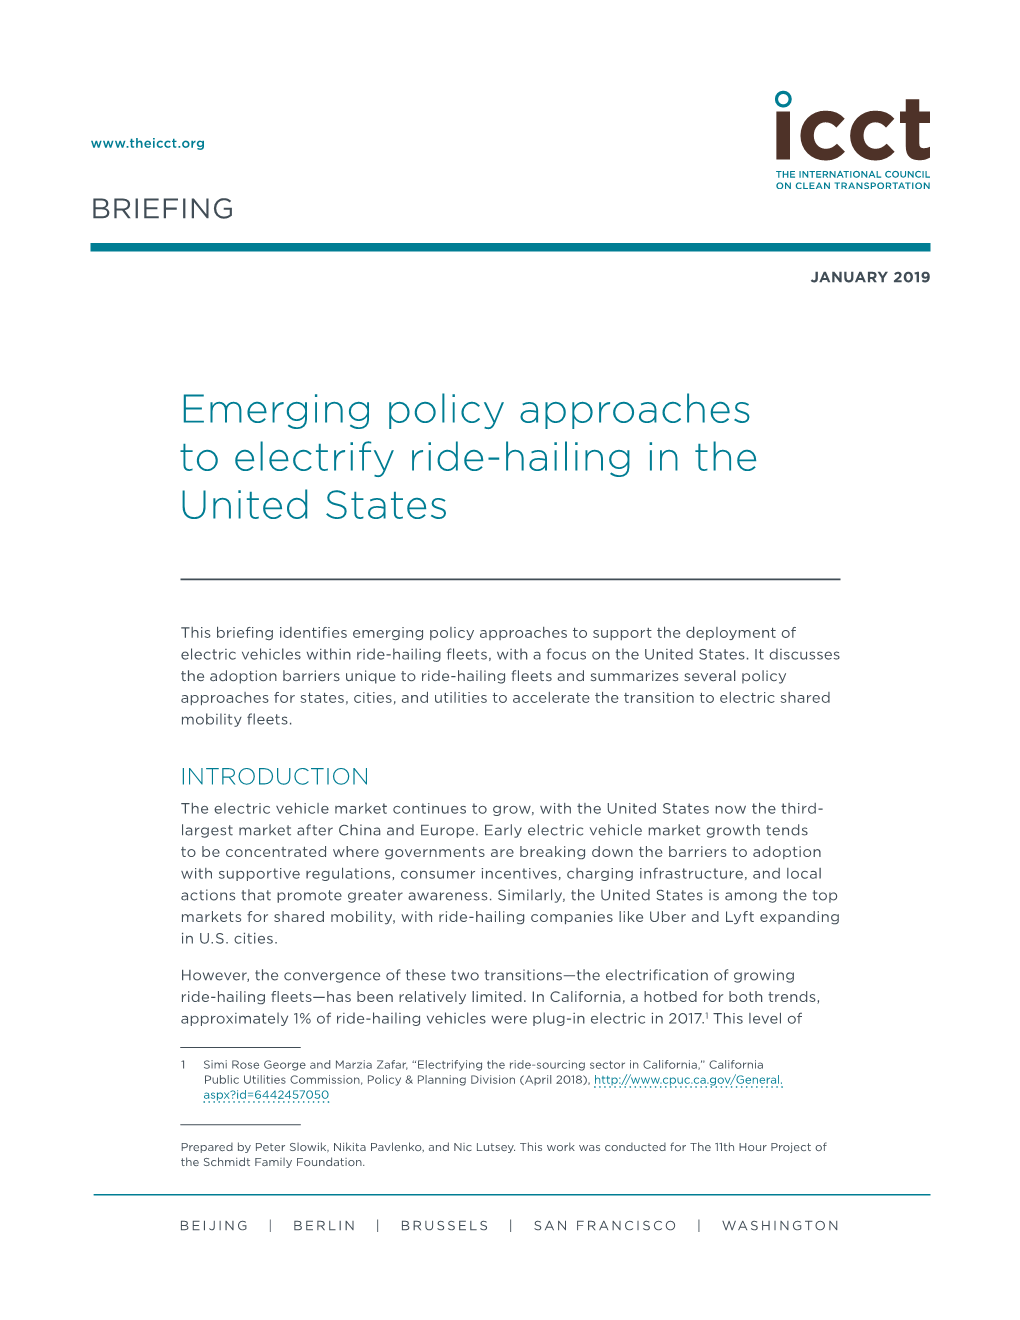 Emerging Policy Approaches to Electrify Ride-Hailing in the United States